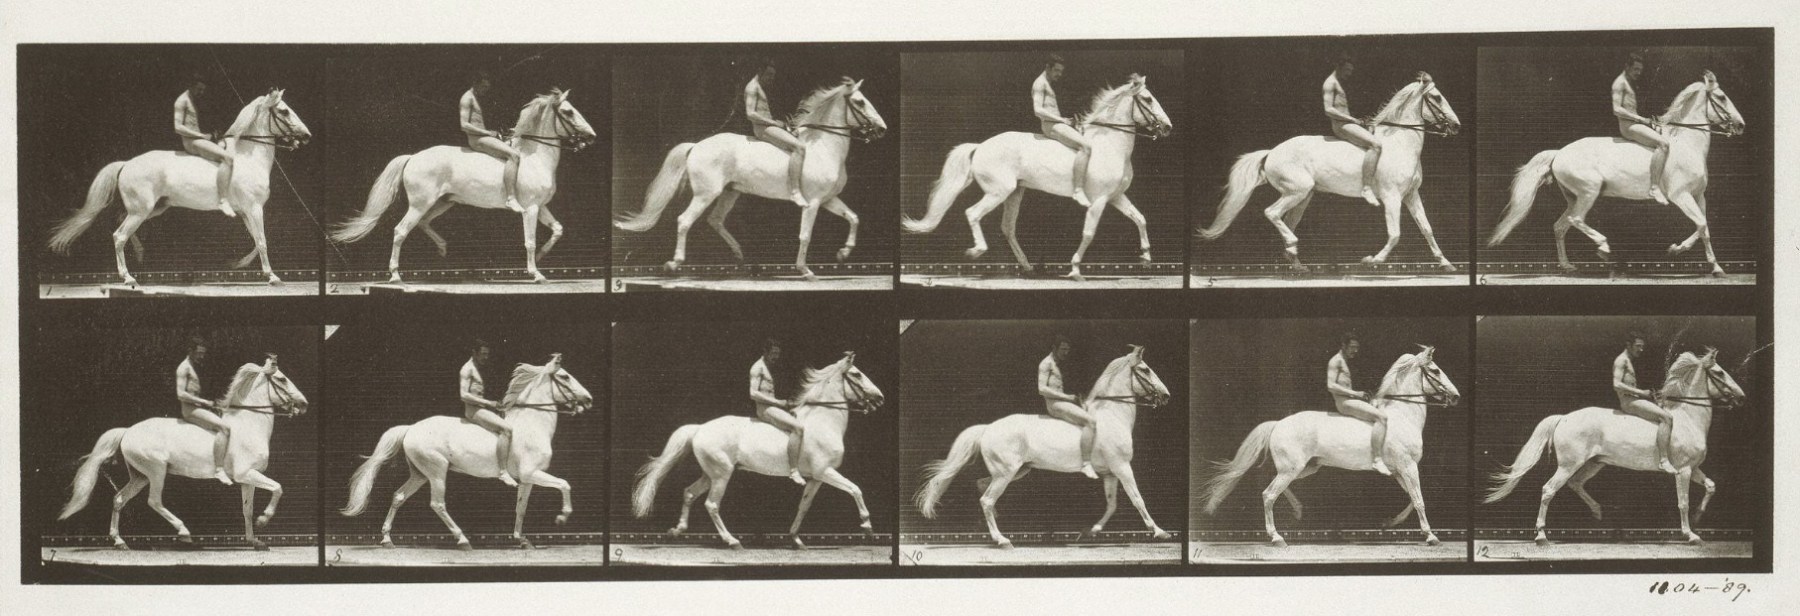 Sequence of black and white photos showing the movements of a trotting horse with a nude man riding bareback